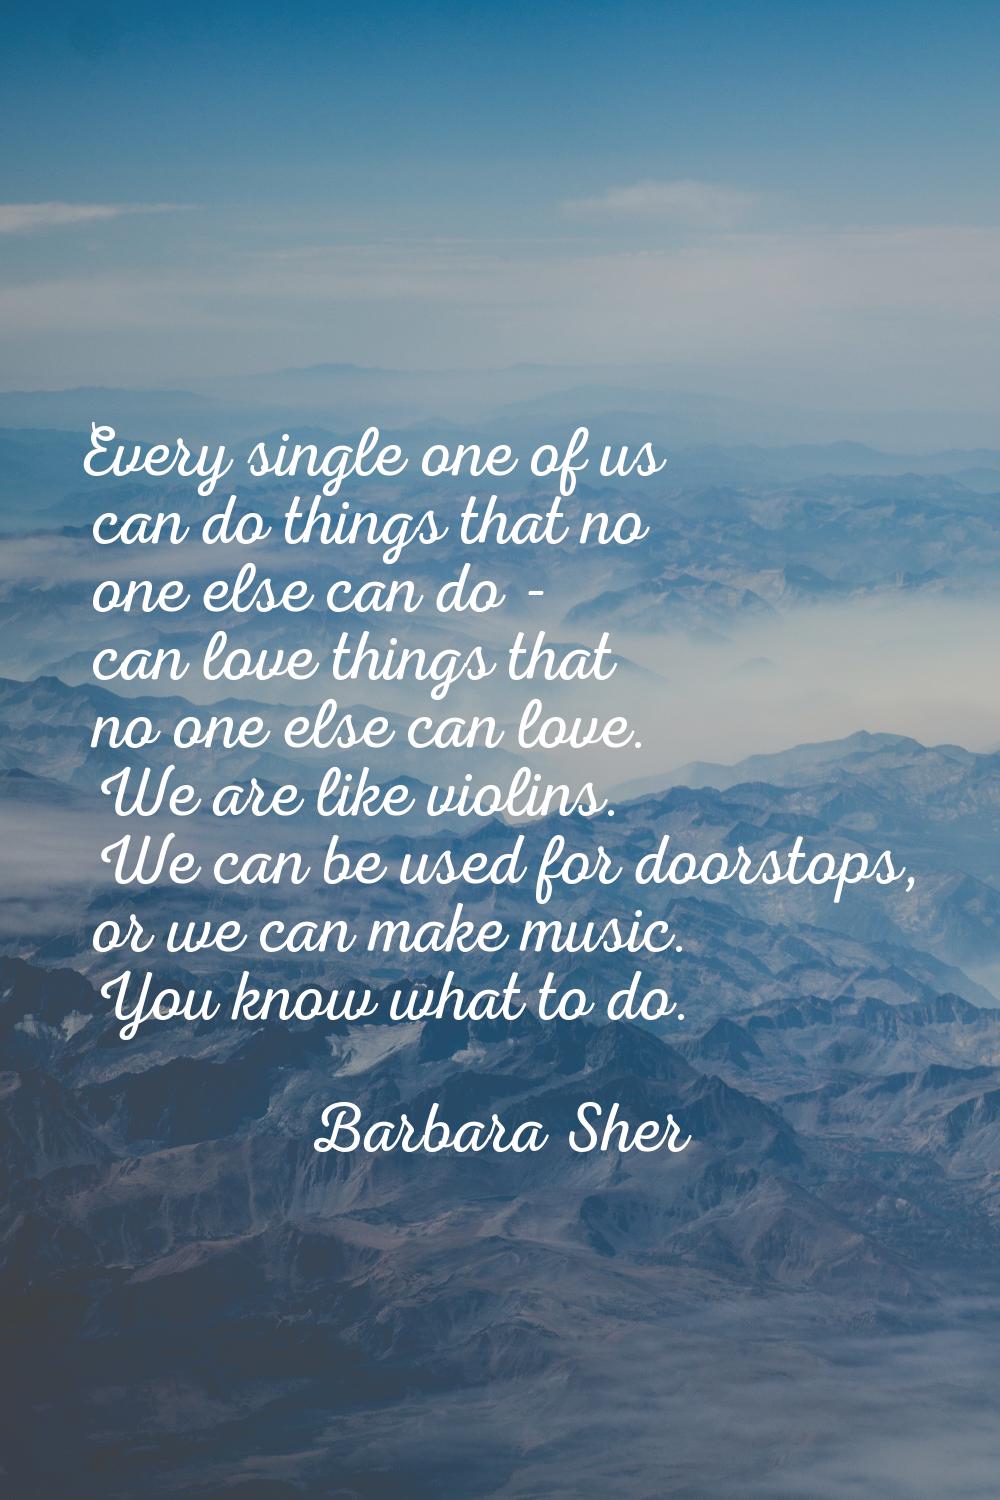 Every single one of us can do things that no one else can do - can love things that no one else can